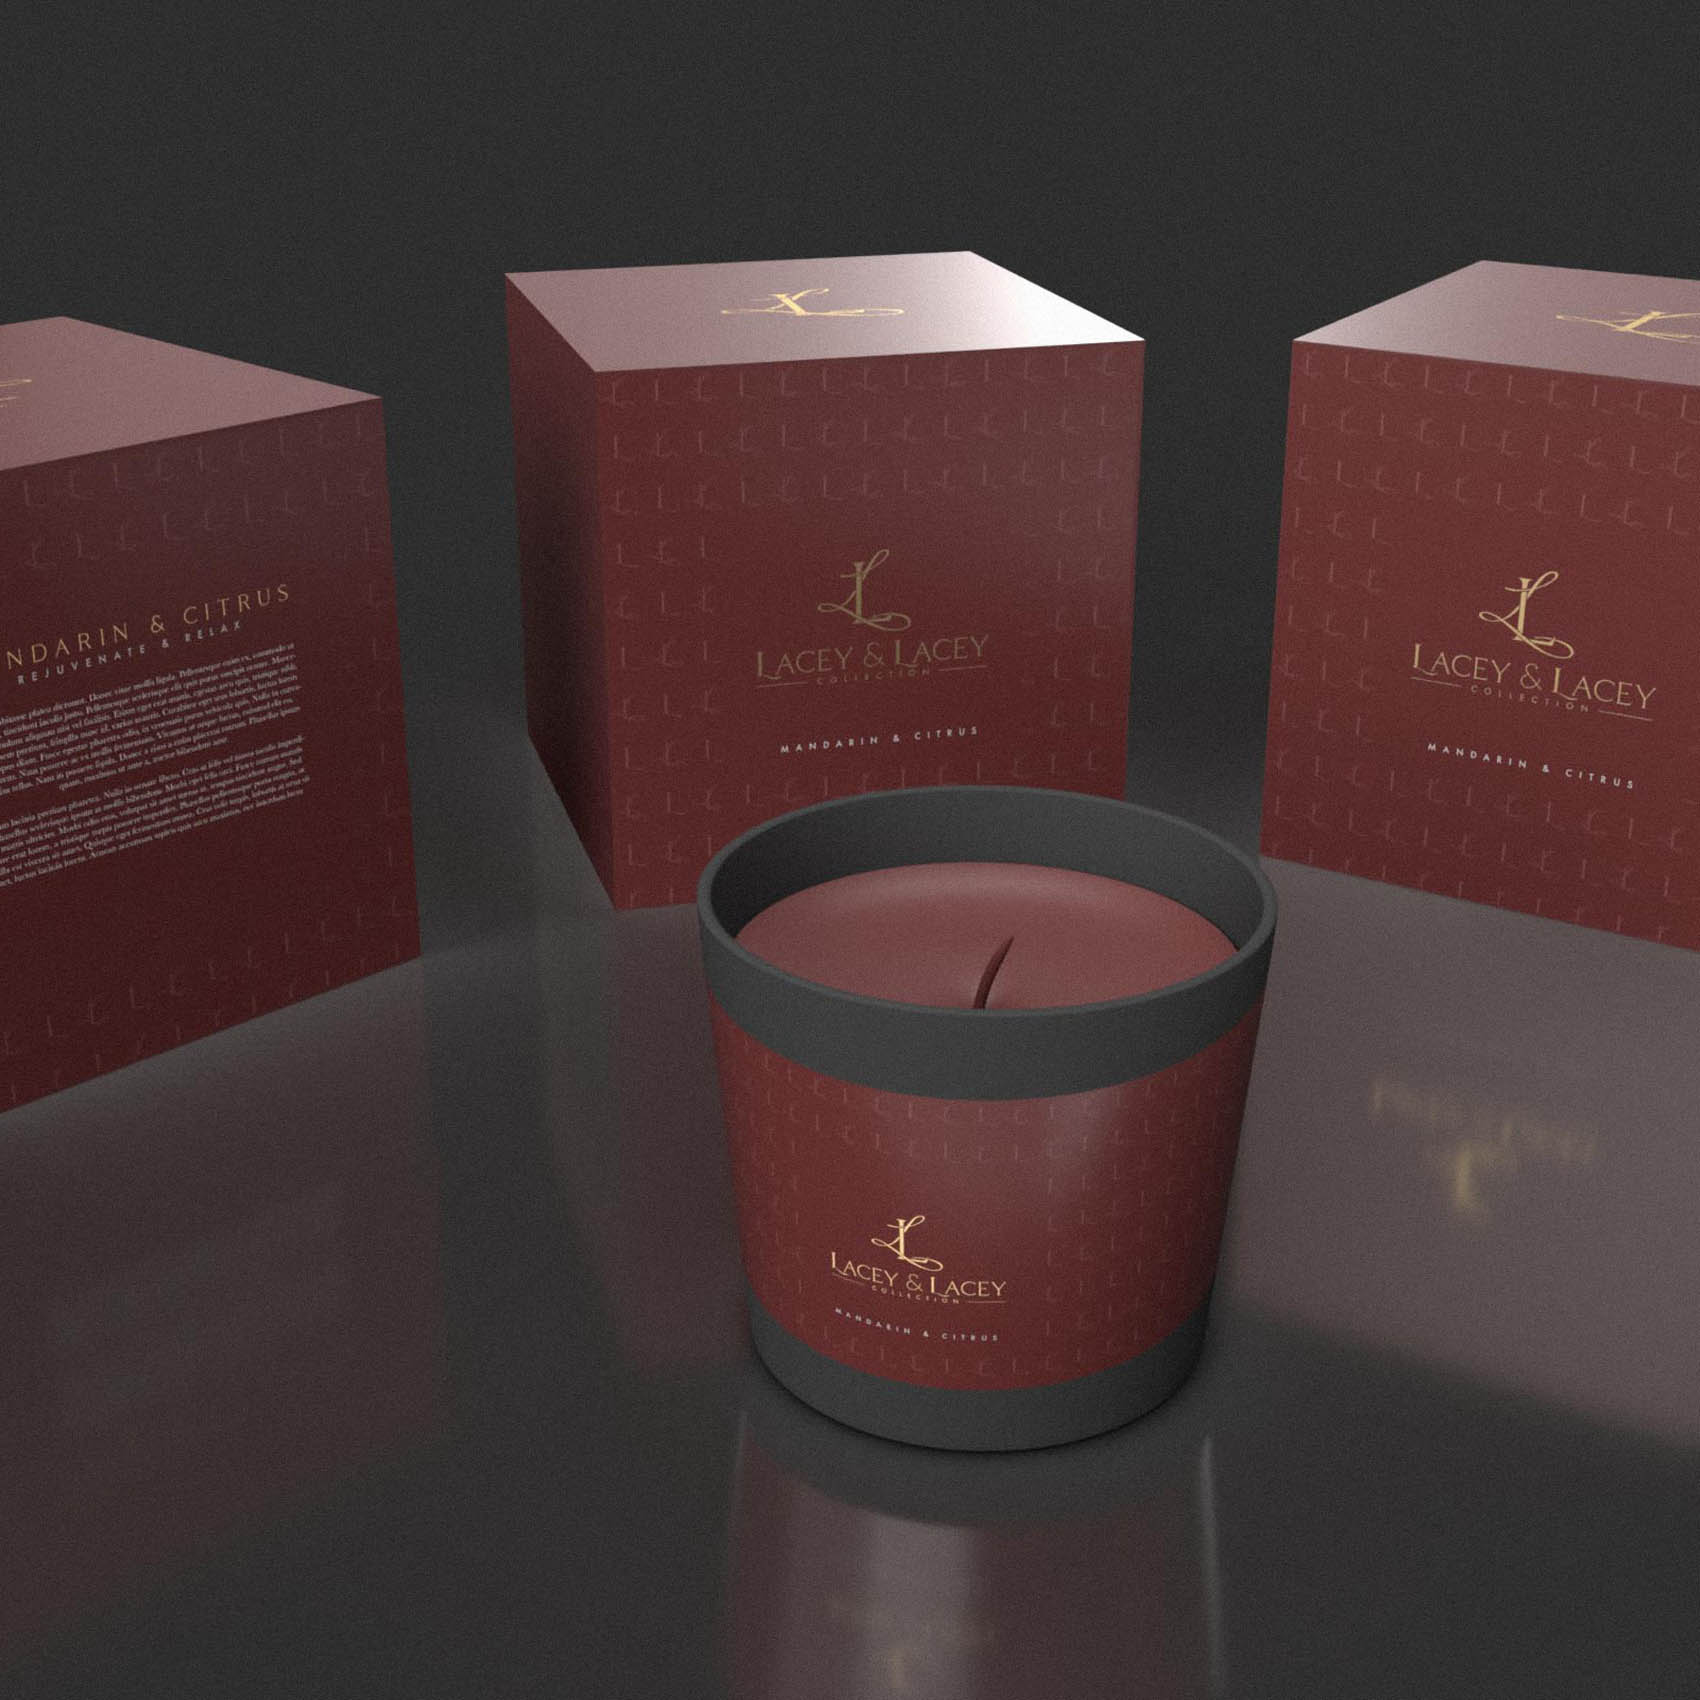 Lacey & Lacey - Luxury Candle Packaging Logo & Brand Identity5